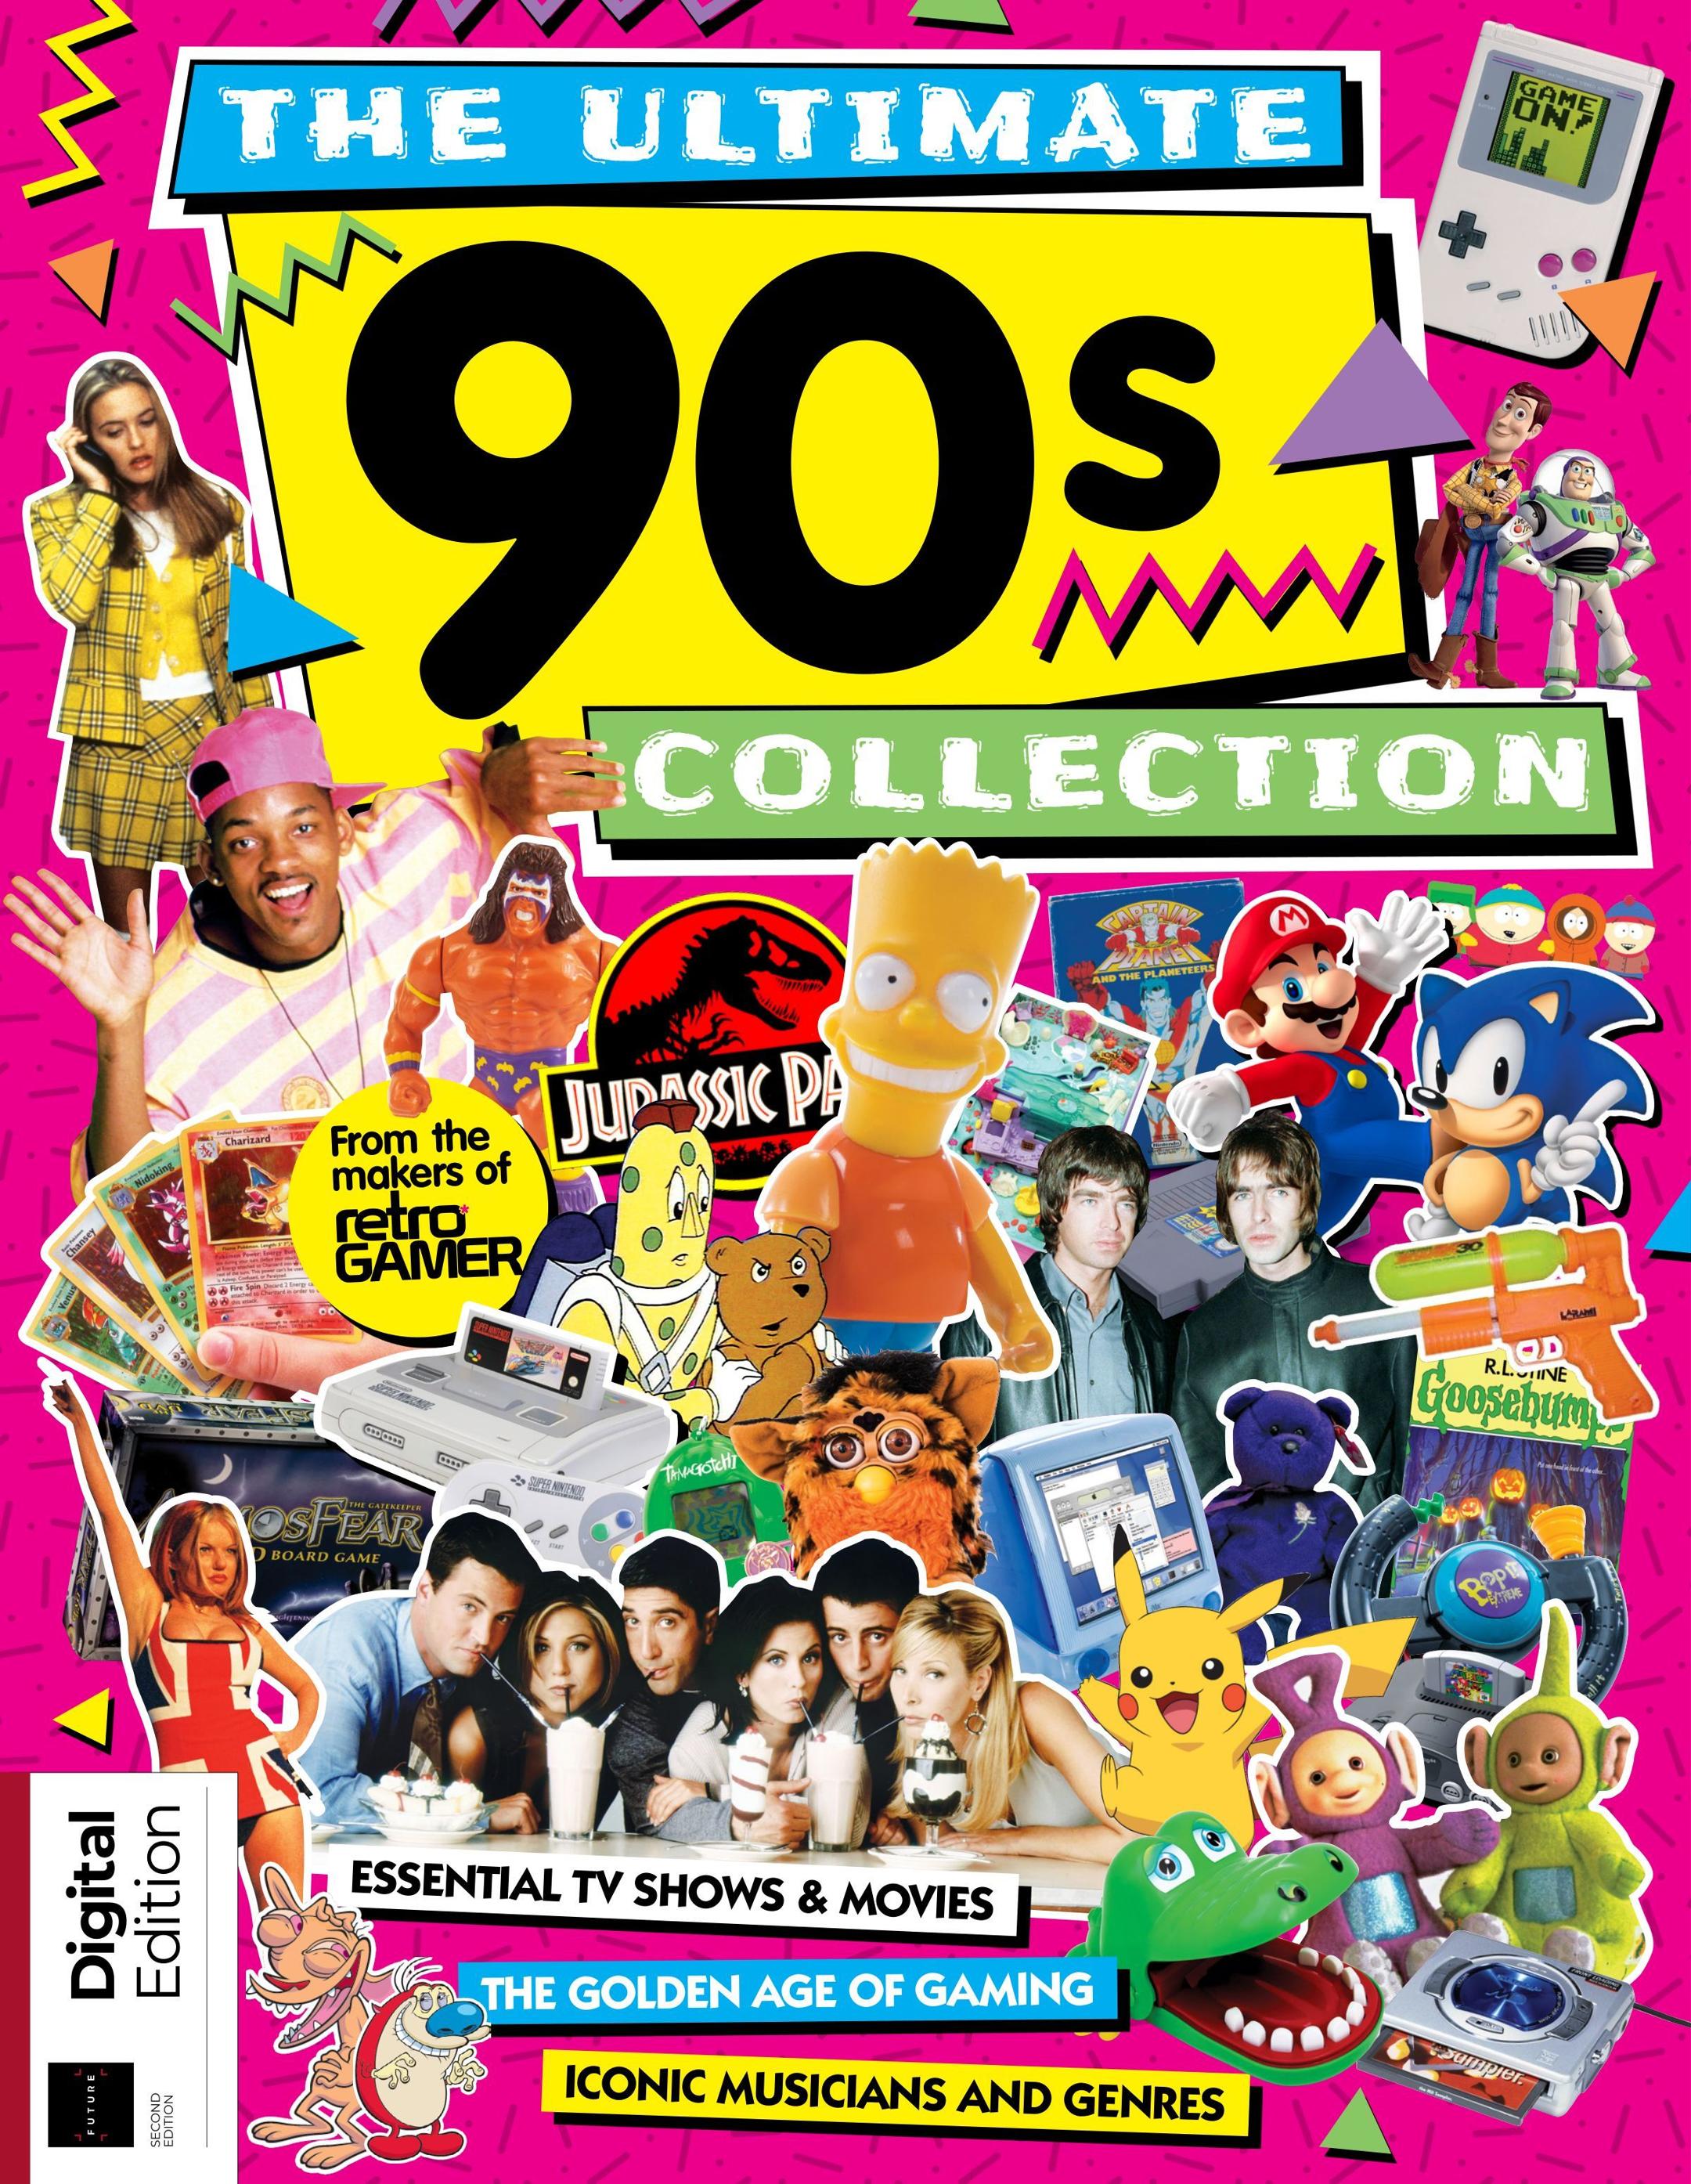 90s collection. 80 Ultimate collection.